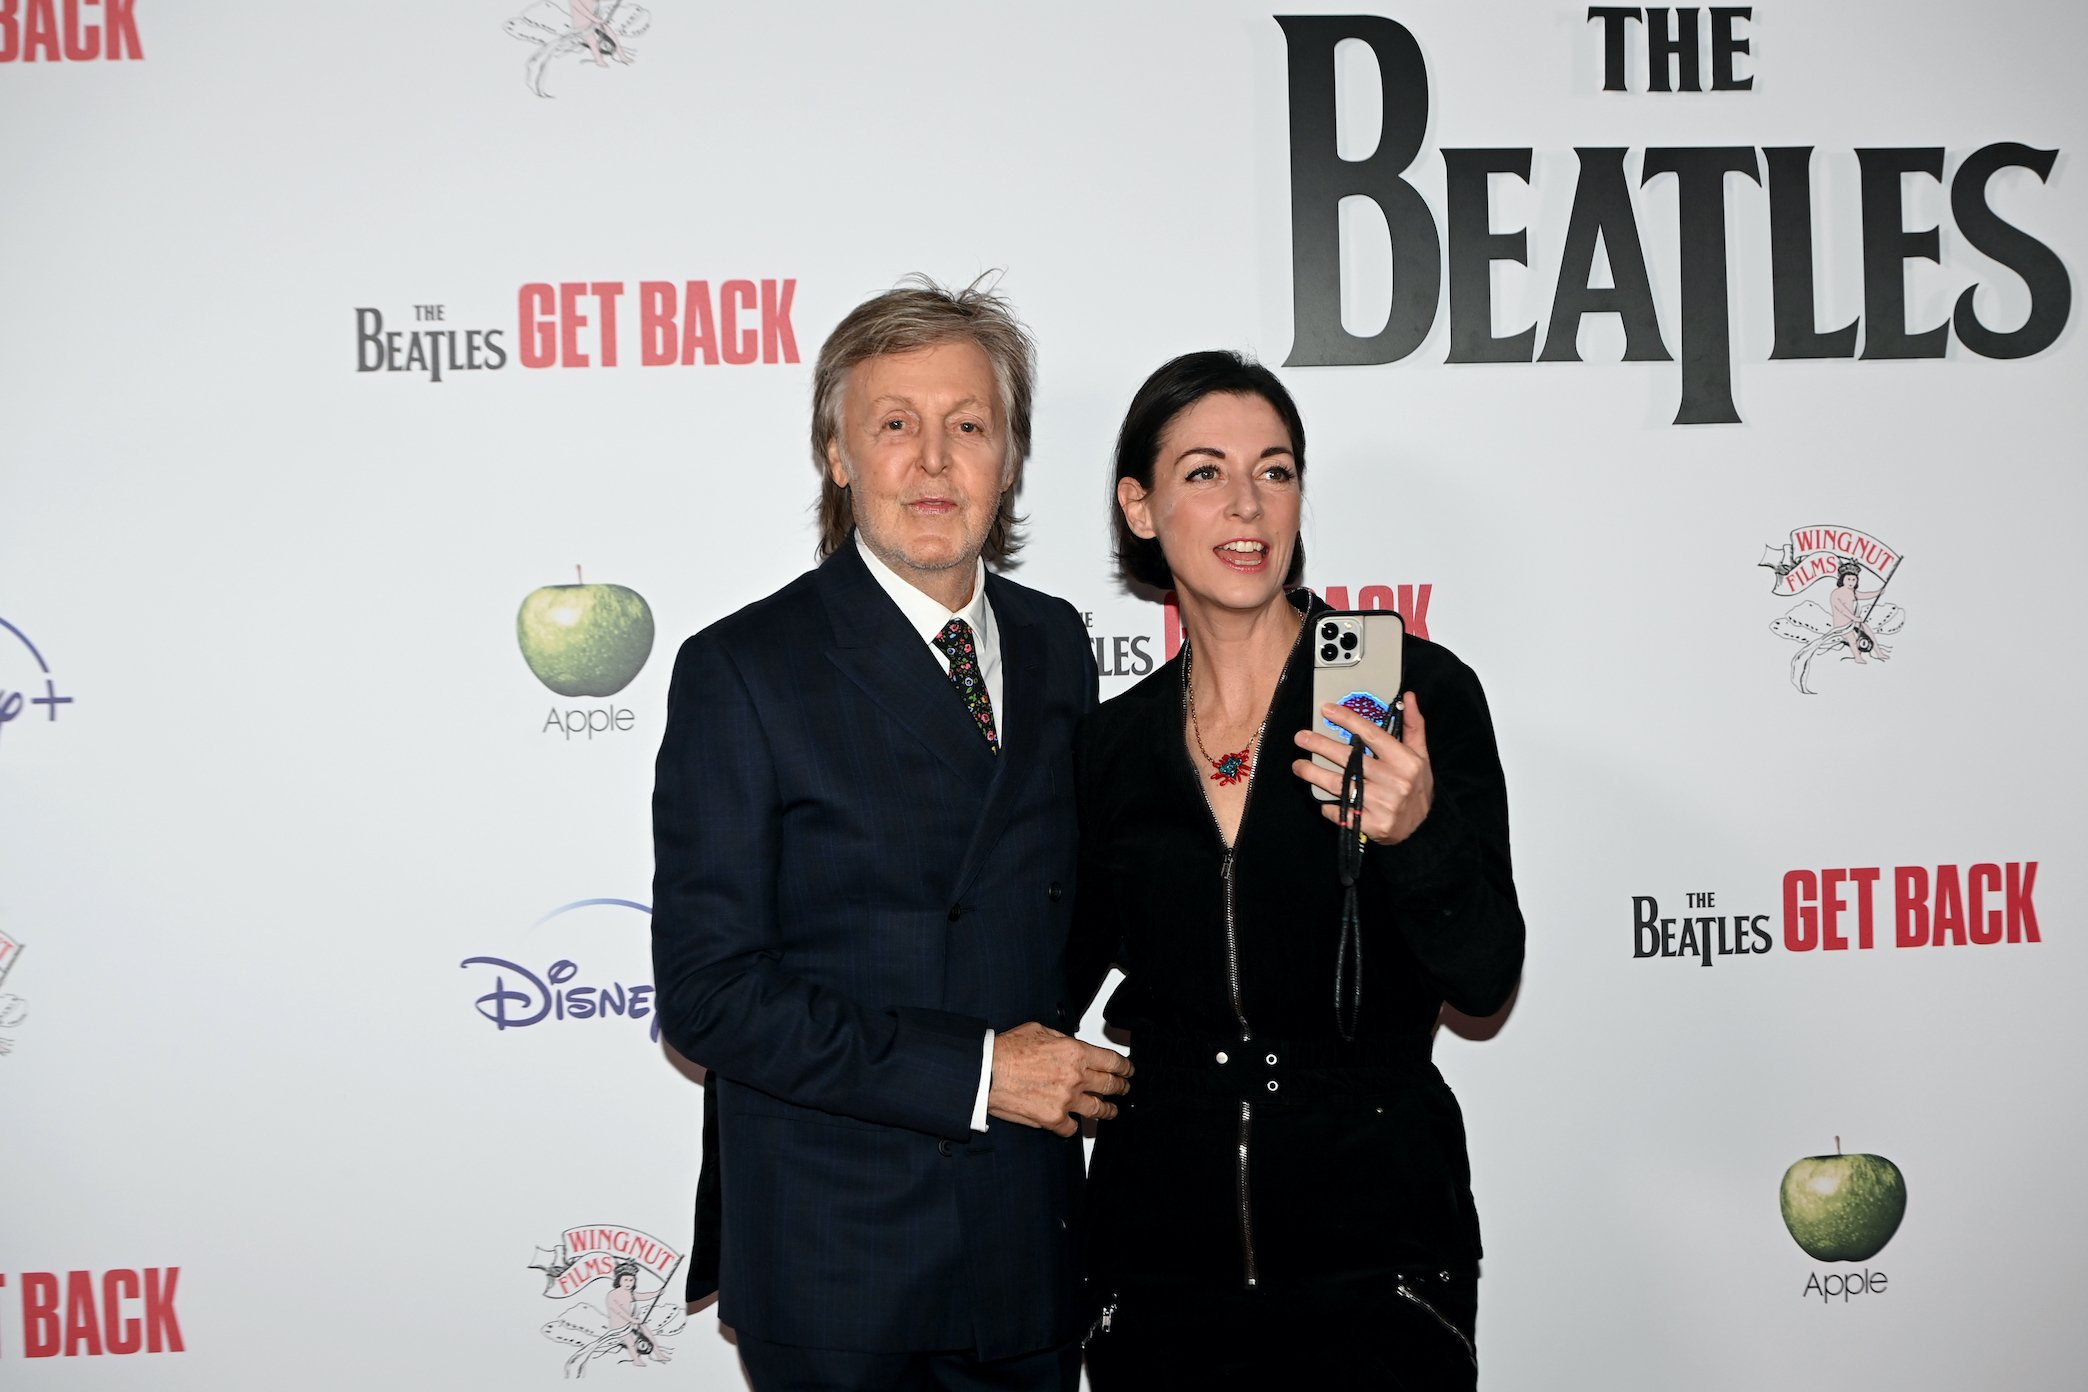 Paul McCartney and Mary McCartney attend the UK premiere of The Beatles: Get Back